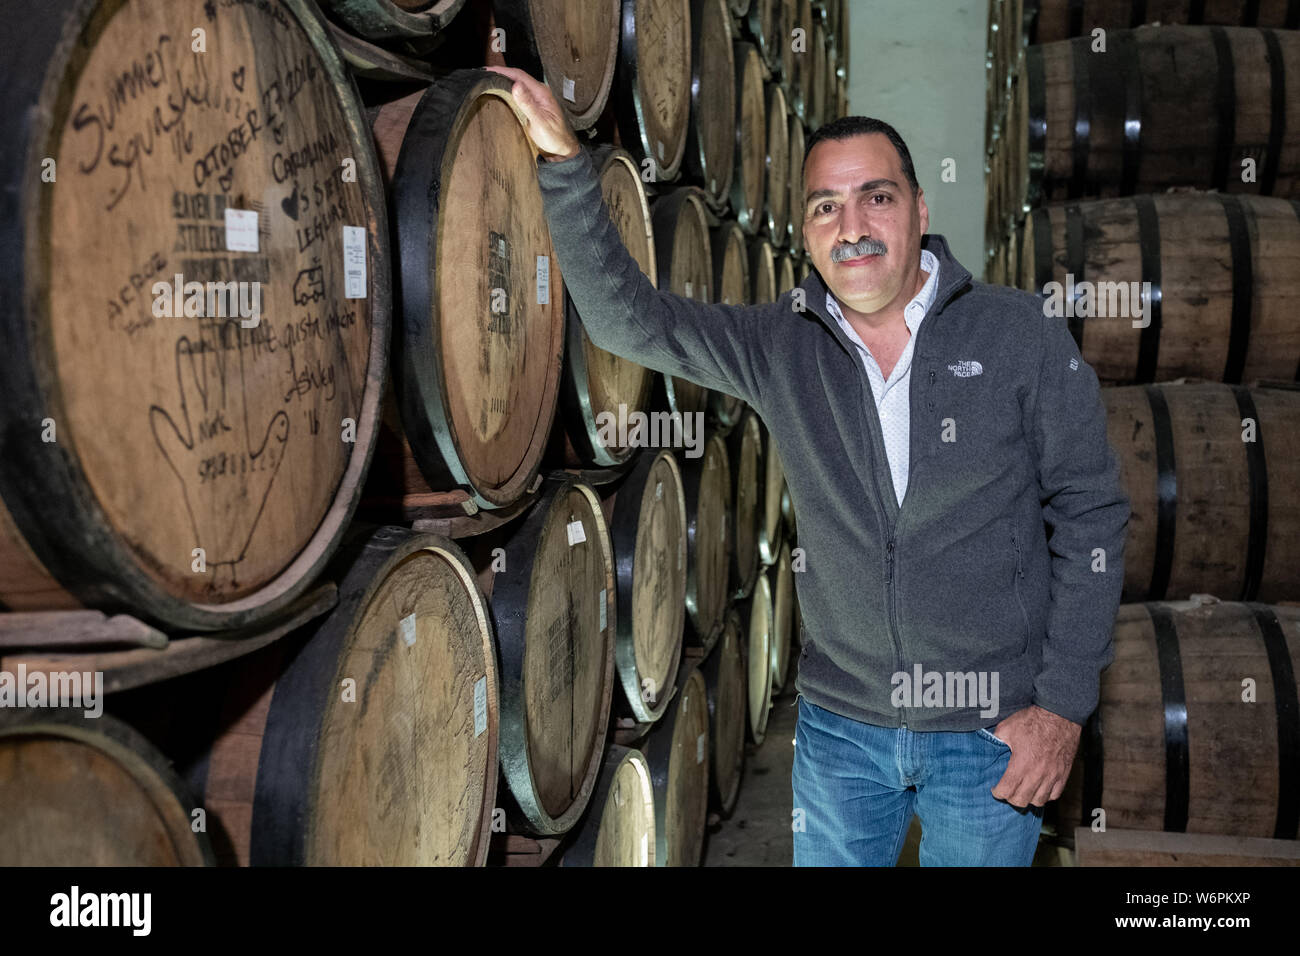 Fernando Gonzales, managing director of Siete Leguas tequila brands and grandson of the founder in the barrel room at the Casa Siete Leguas, El Centenario tequila distillery in Atotonilco de Alto, Jalisco, Mexico. The Seven Leagues tequila distillery is the oldest family owned distillery producing authentic handcrafted tequila using traditional methods. Stock Photo